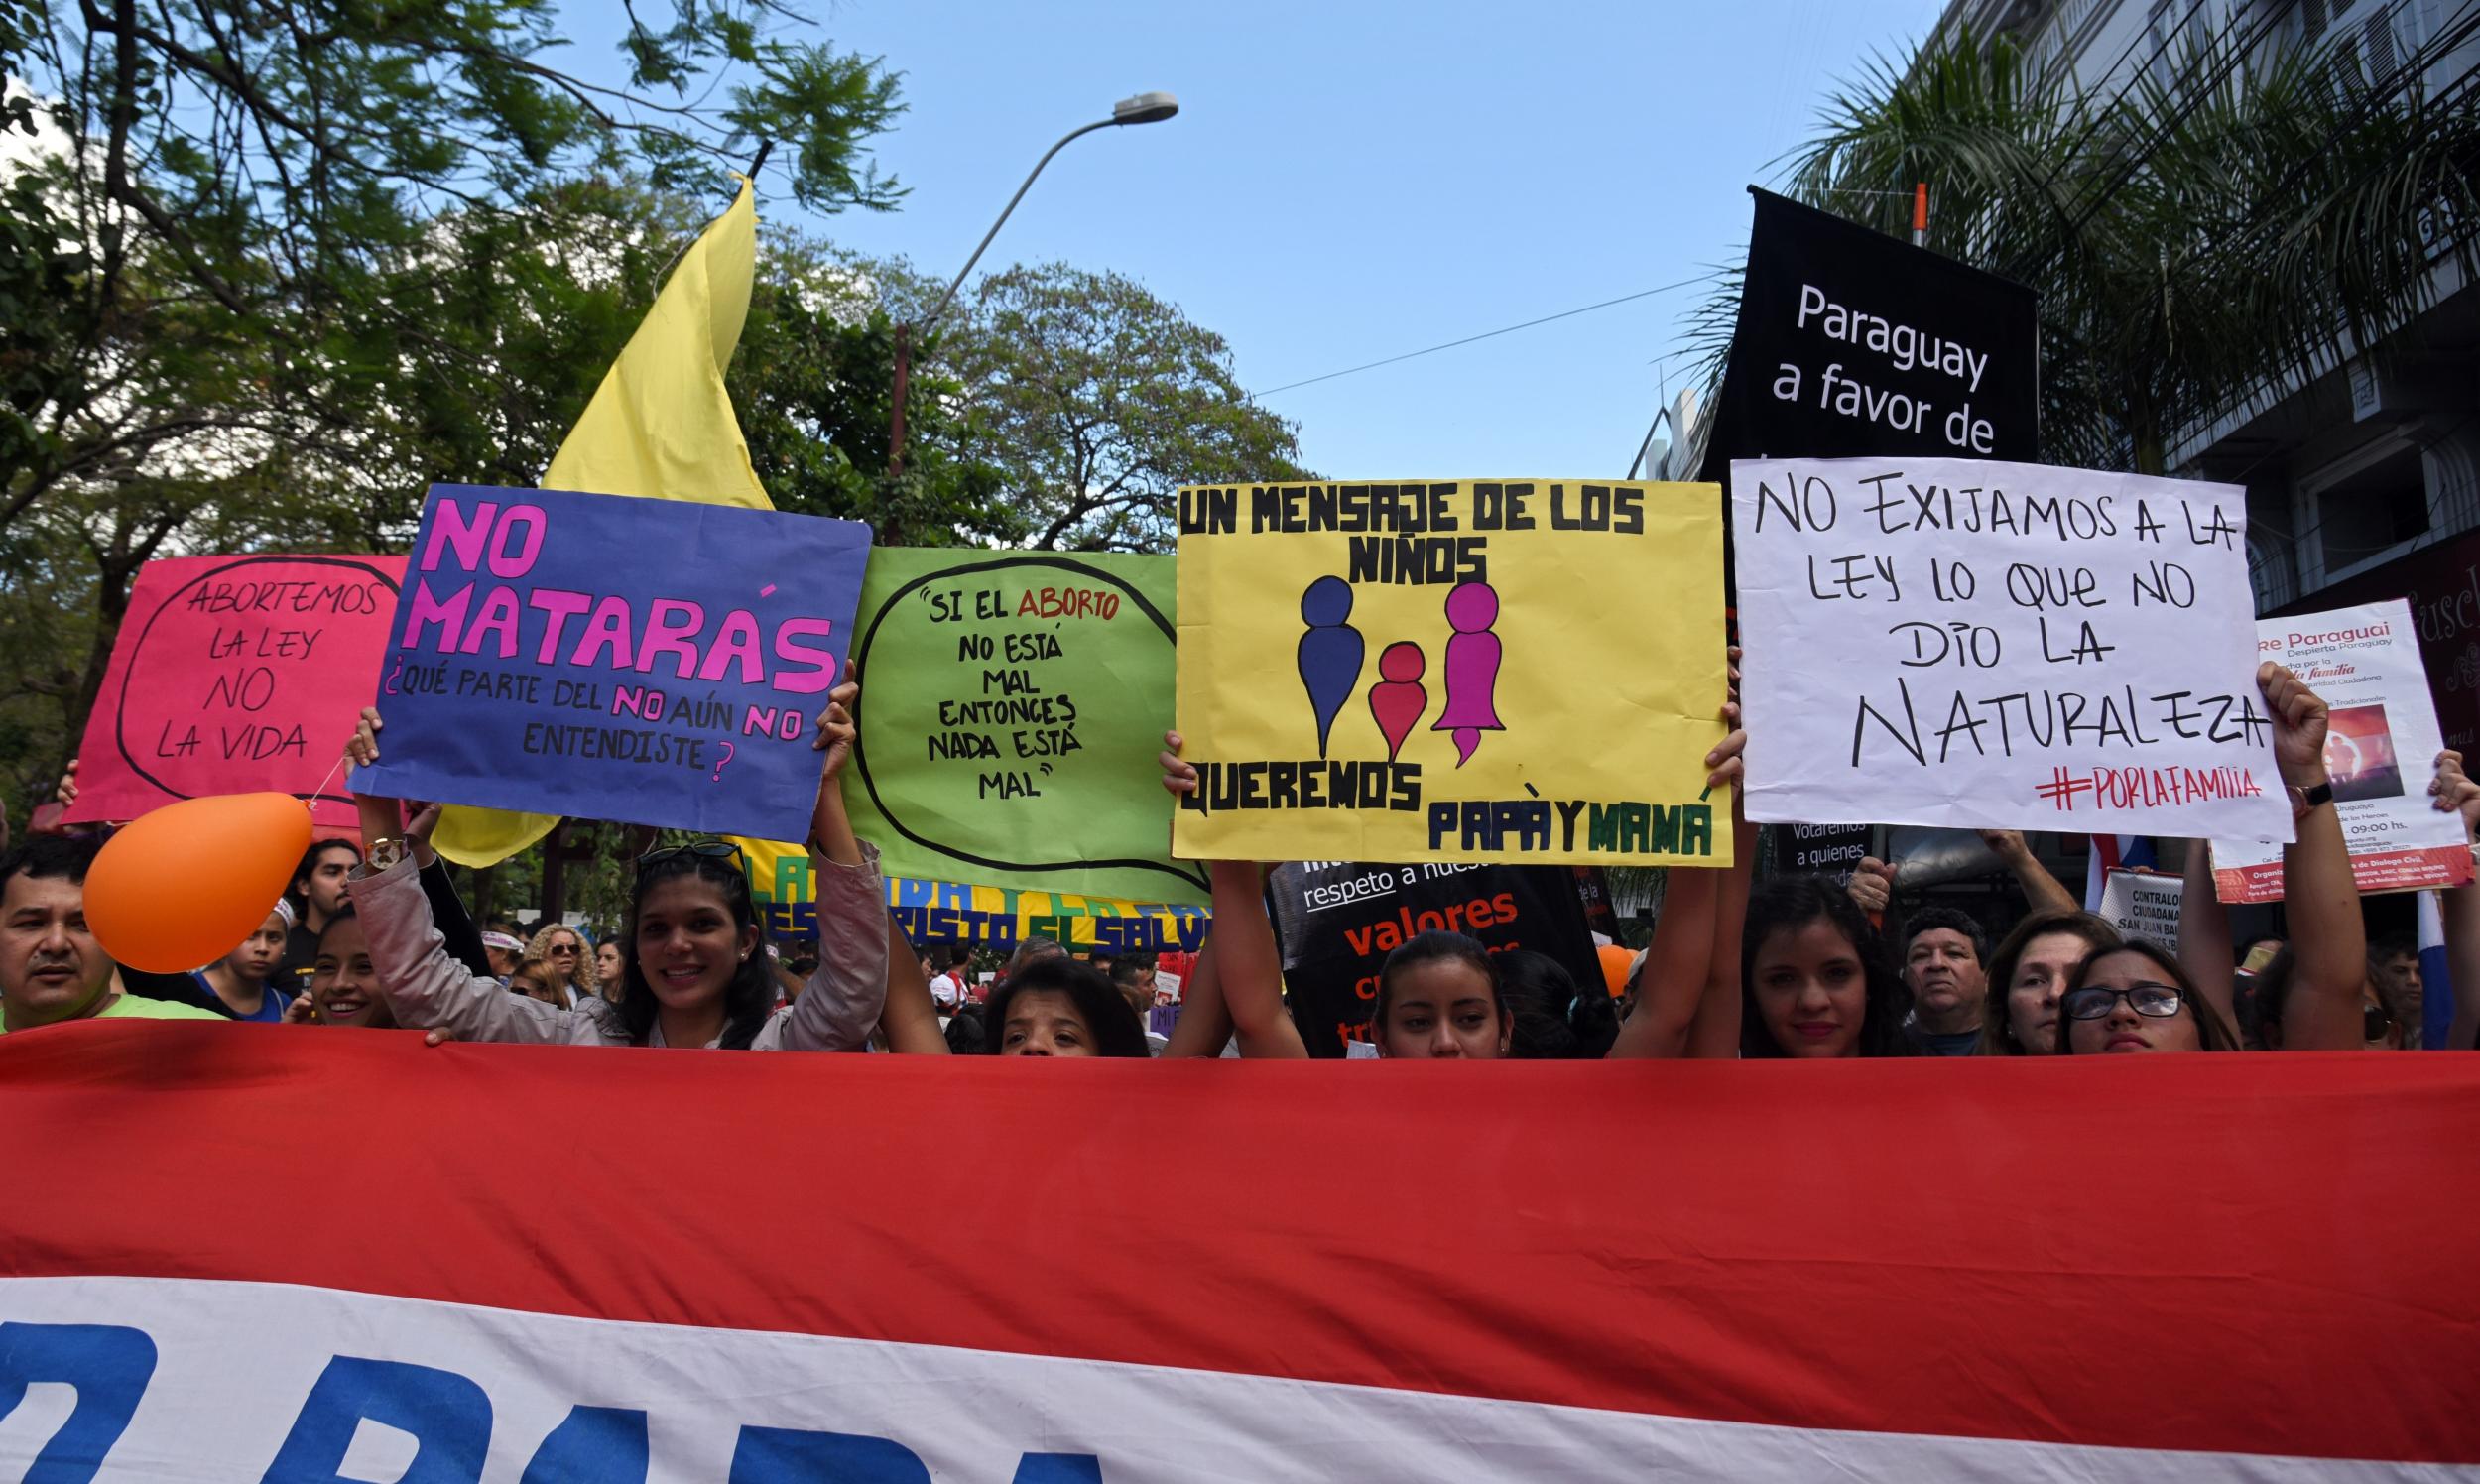 Pro-abortion protesters march in Asuncion, Paraguay, where abortion is illegal